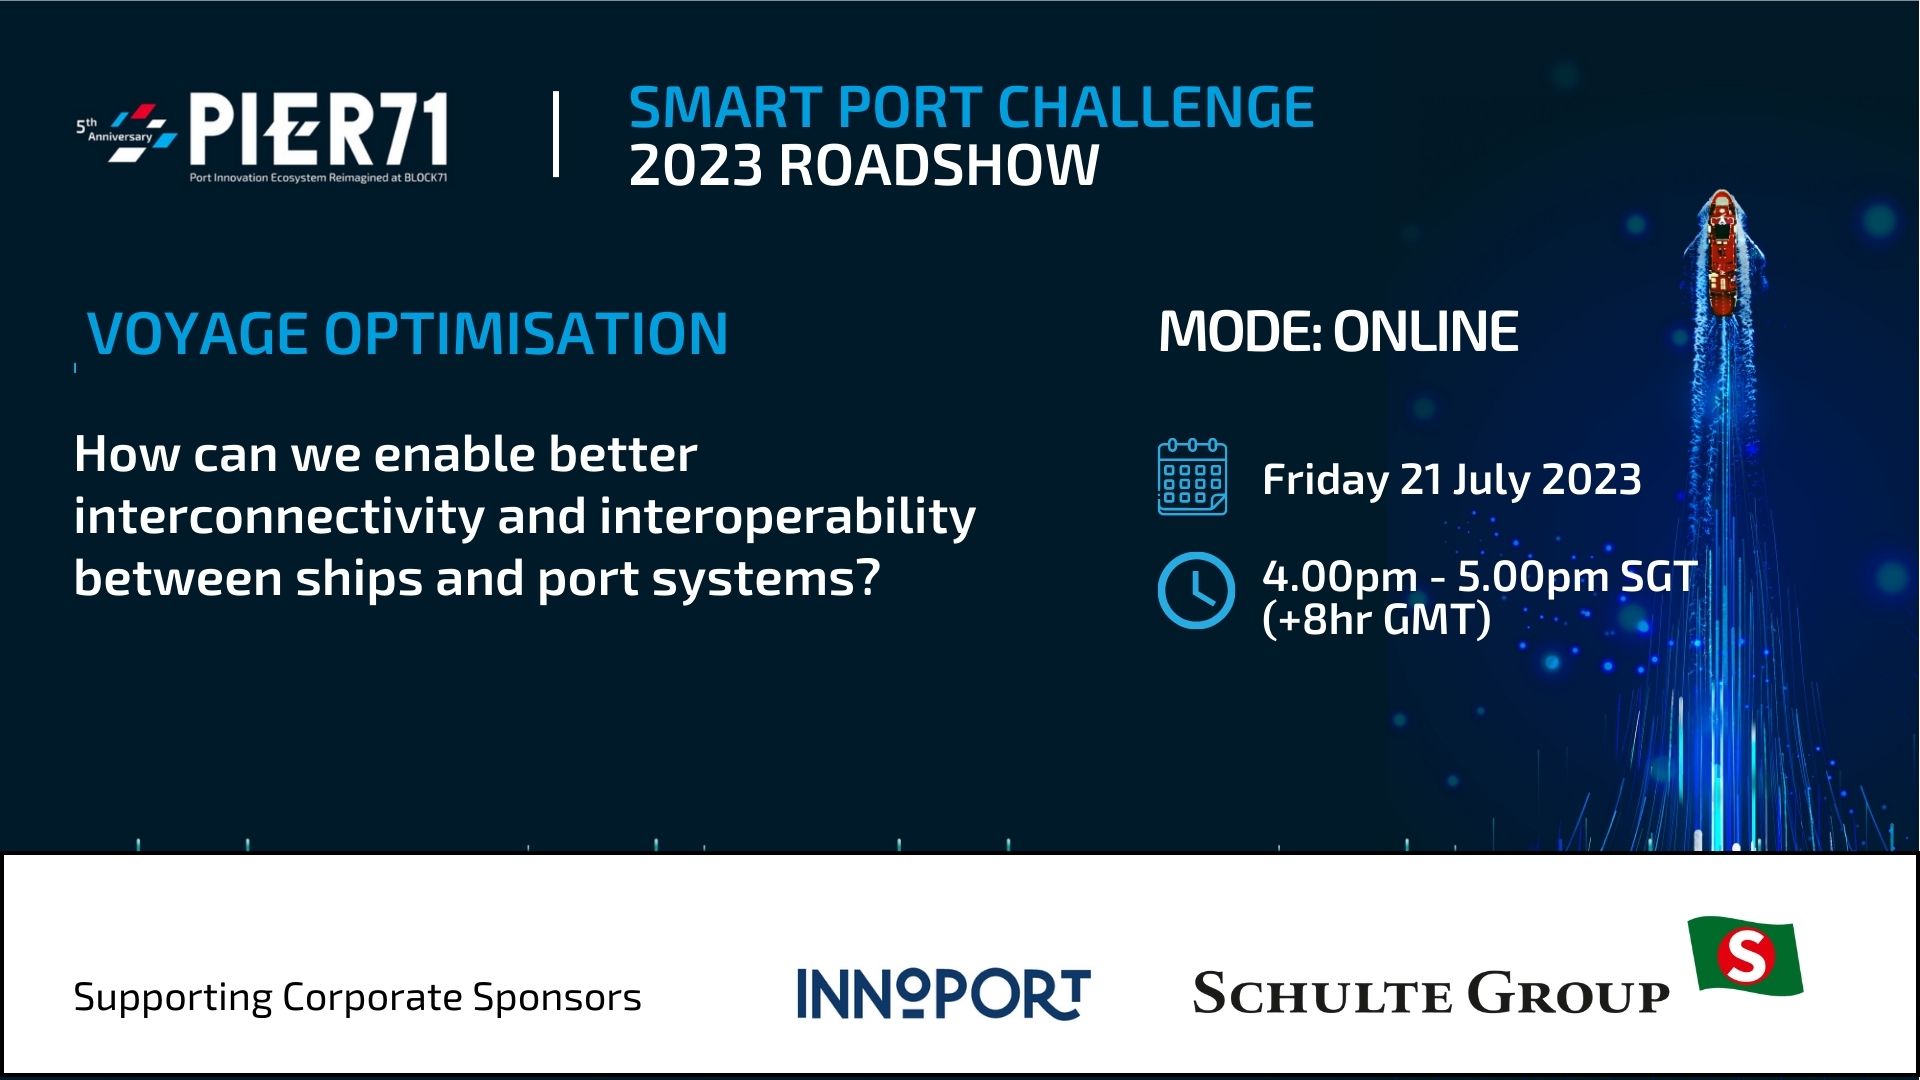 SPC2023 Online Roadshow: Voyage Optimisation: How Can We Enable Better Interconnectivity And Interoperability Between Ships And Port Systems?